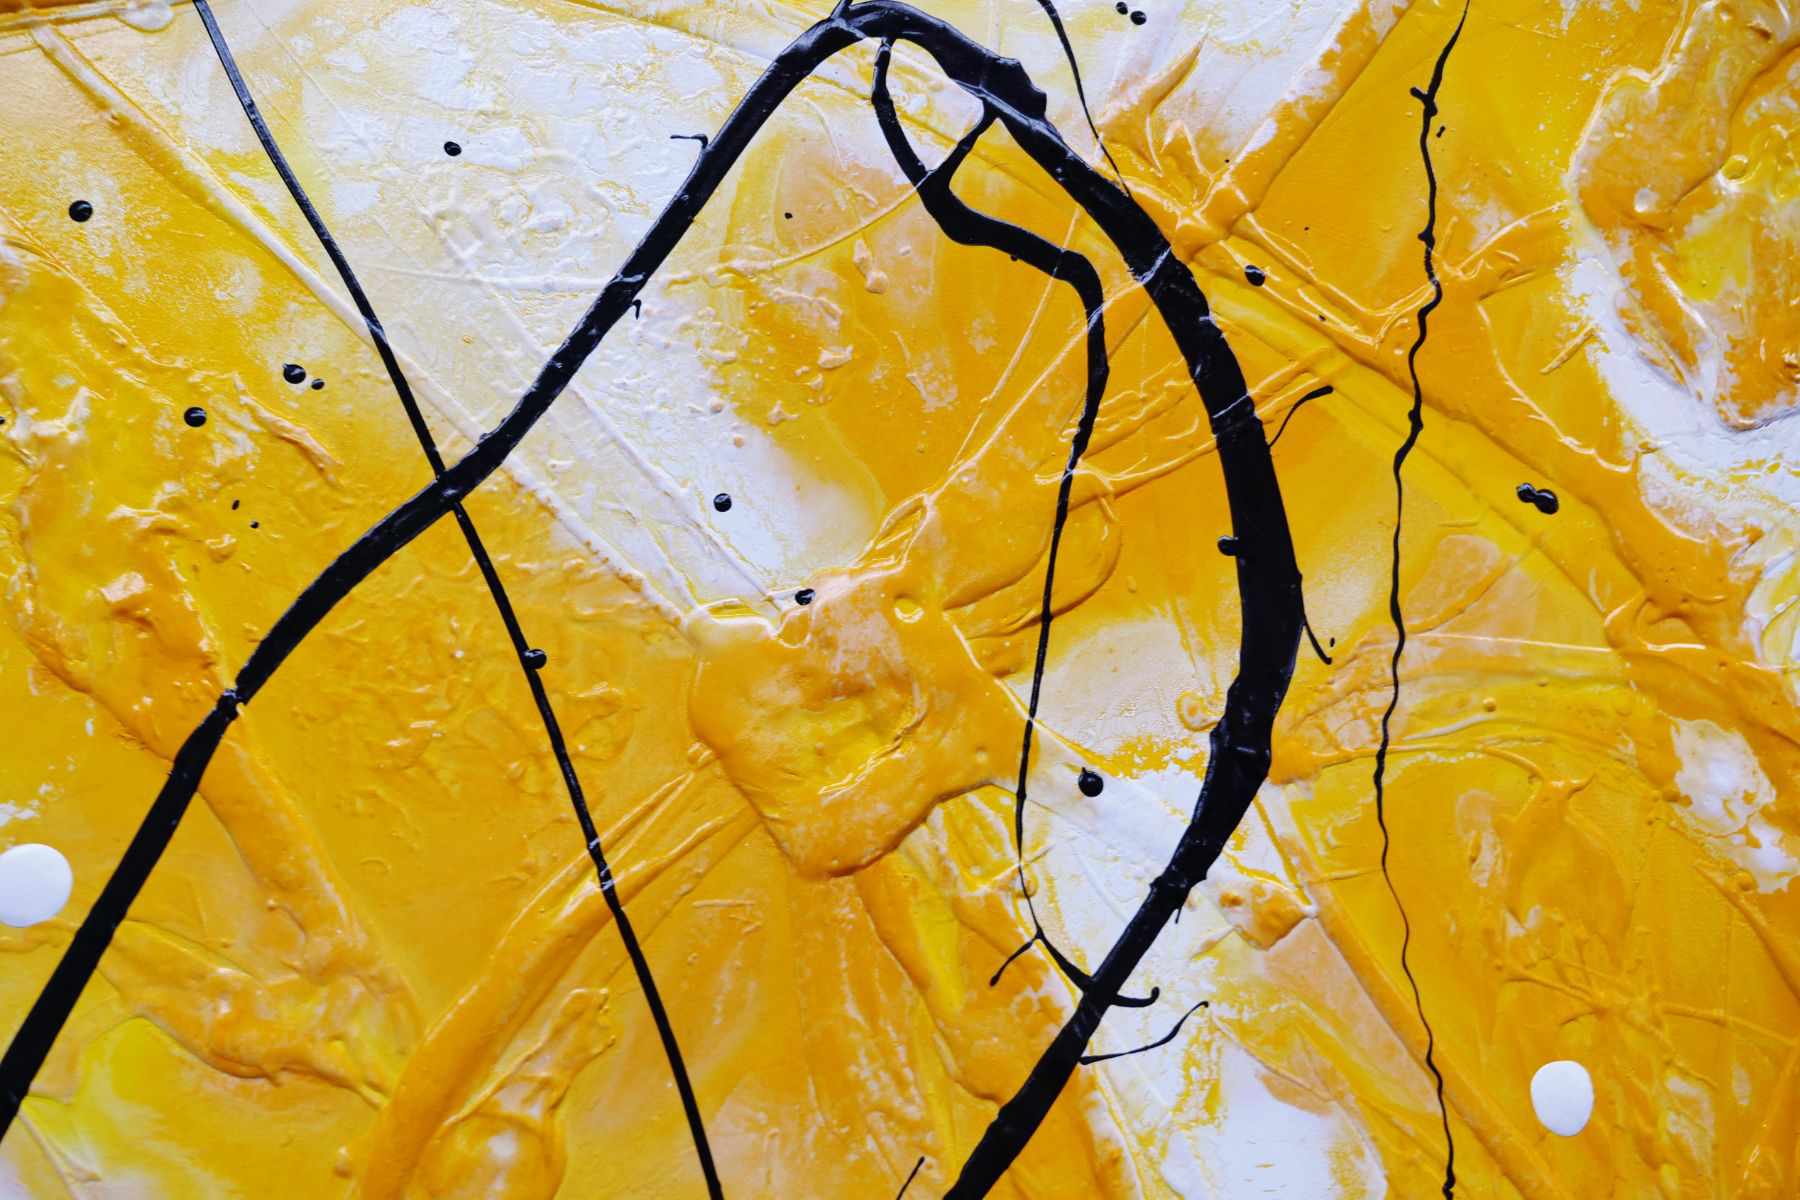 Golden Bandit 240cm x 120cm Yellow White Black Textured Abstract Painting (SOLD)